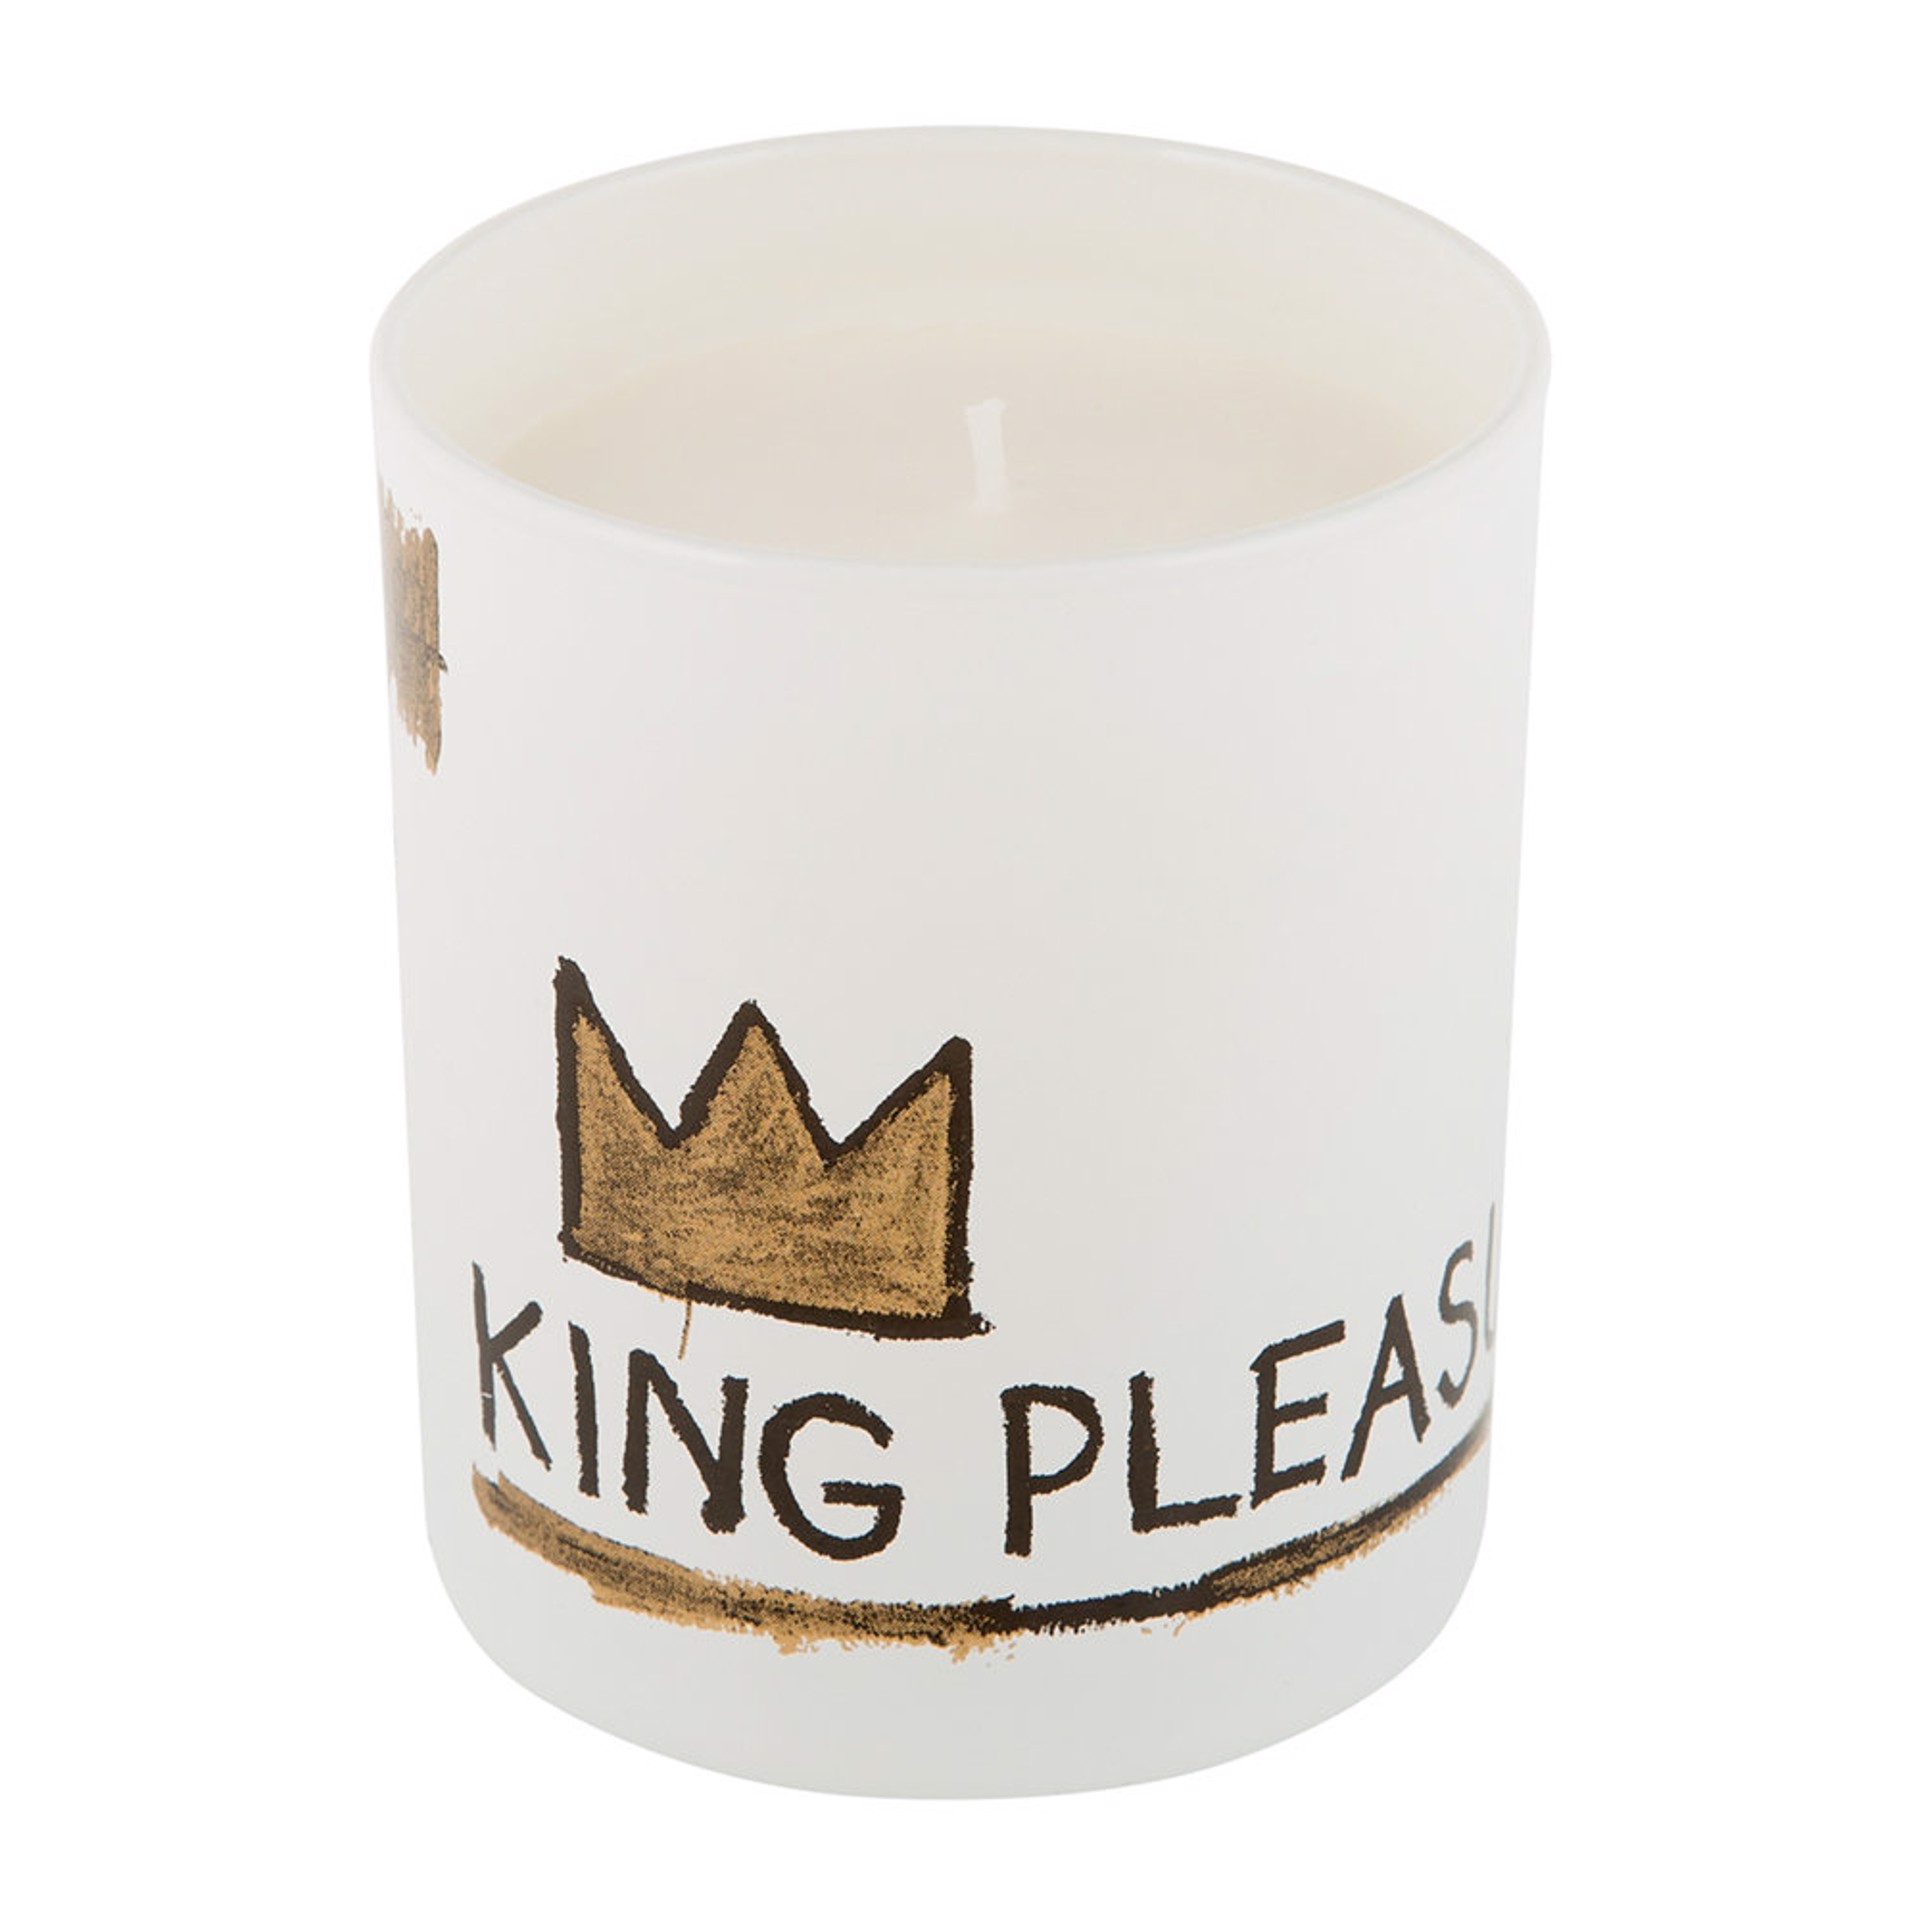 King Pleasure Scented Candle by Jean-Michel Basquiat